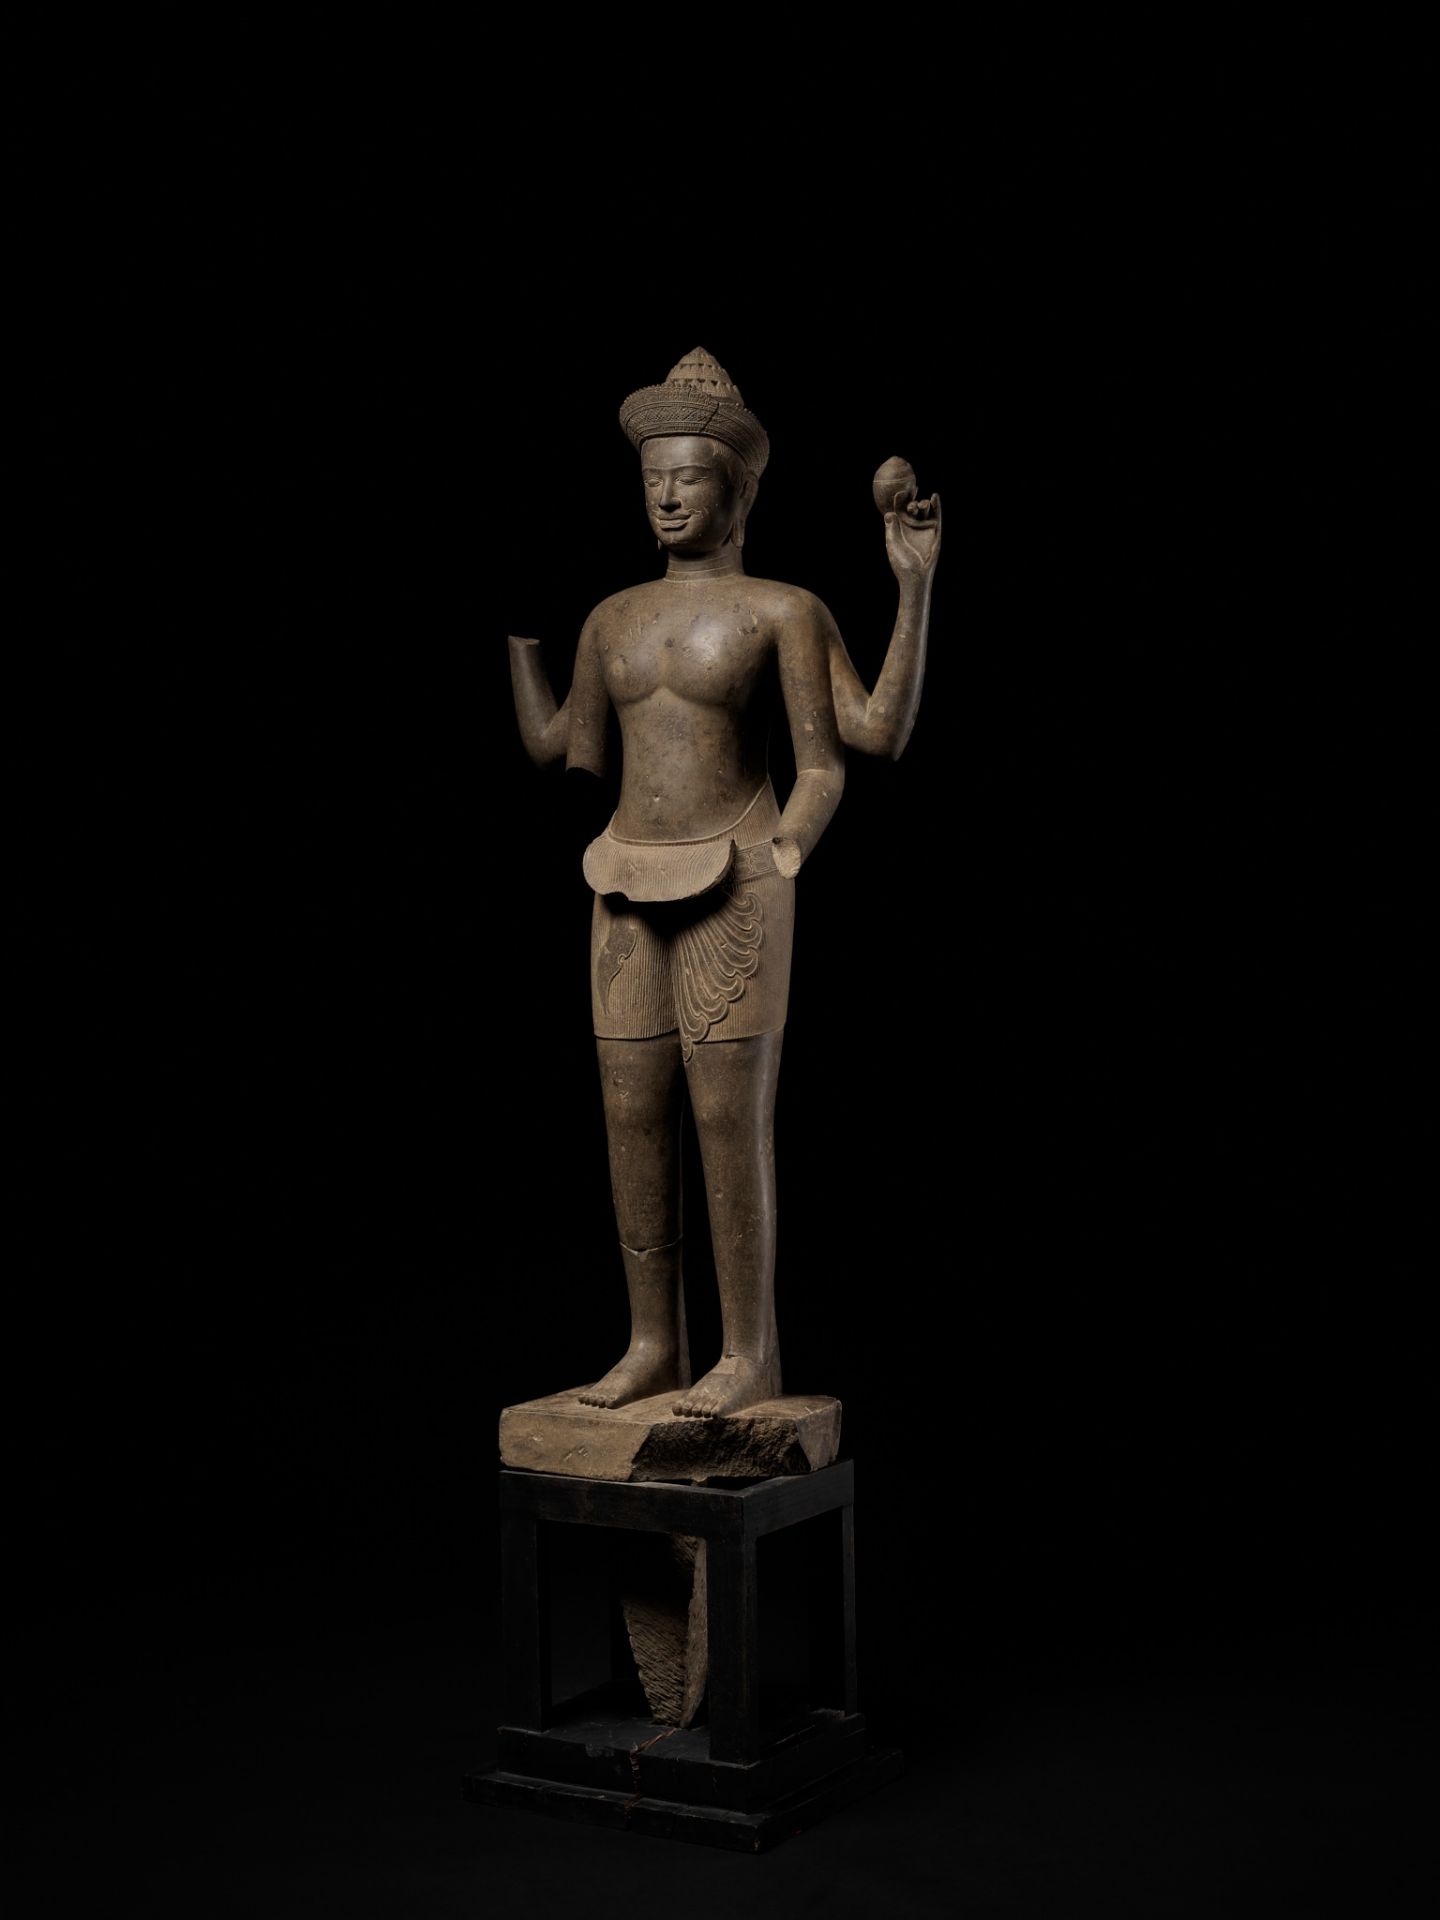 AN EXTREMELY RARE AND MONUMENTAL SANDSTONE STATUE OF VISHNU, ANGKOR PERIOD - Image 17 of 17